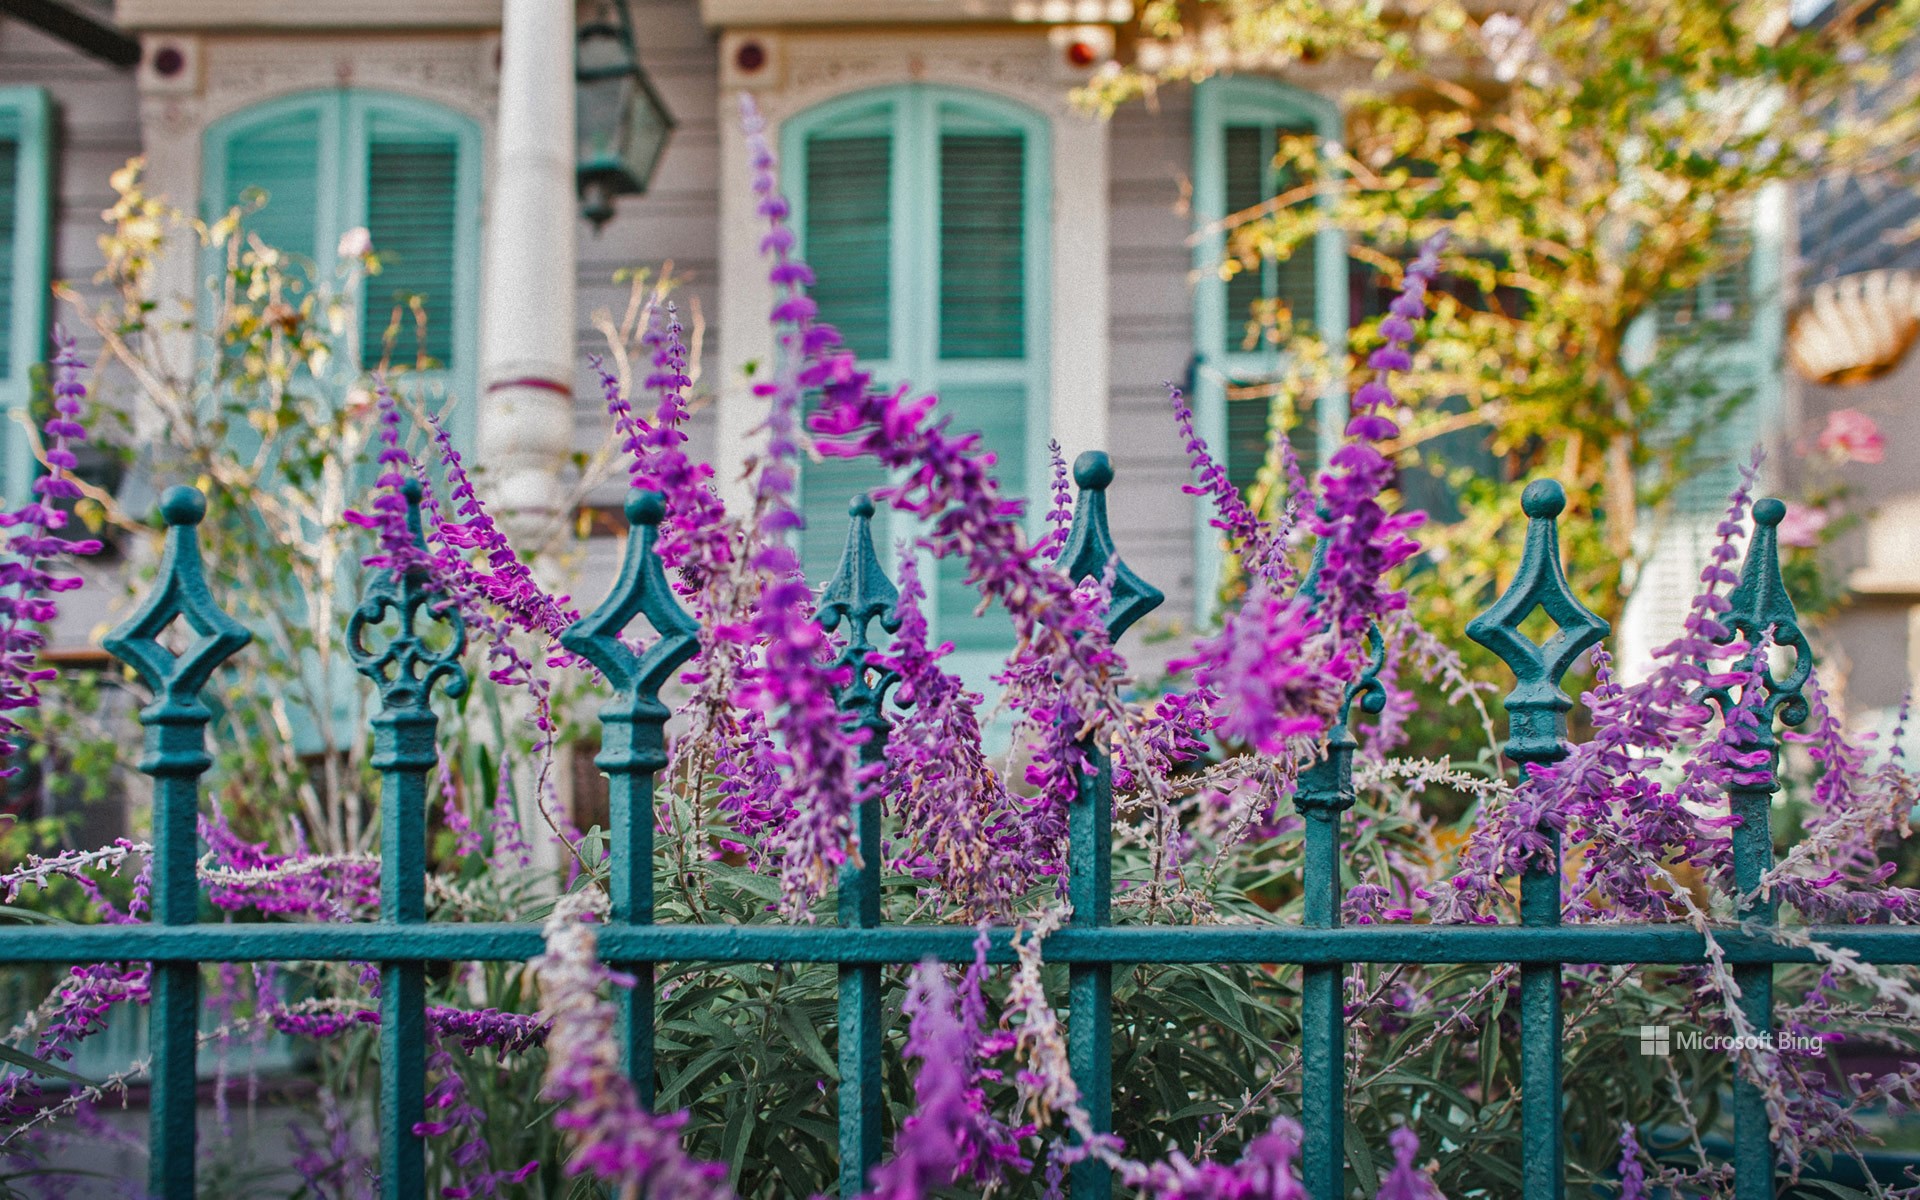 Flowers and an ironwork fence in front of a house in New Orleans, Louisiana